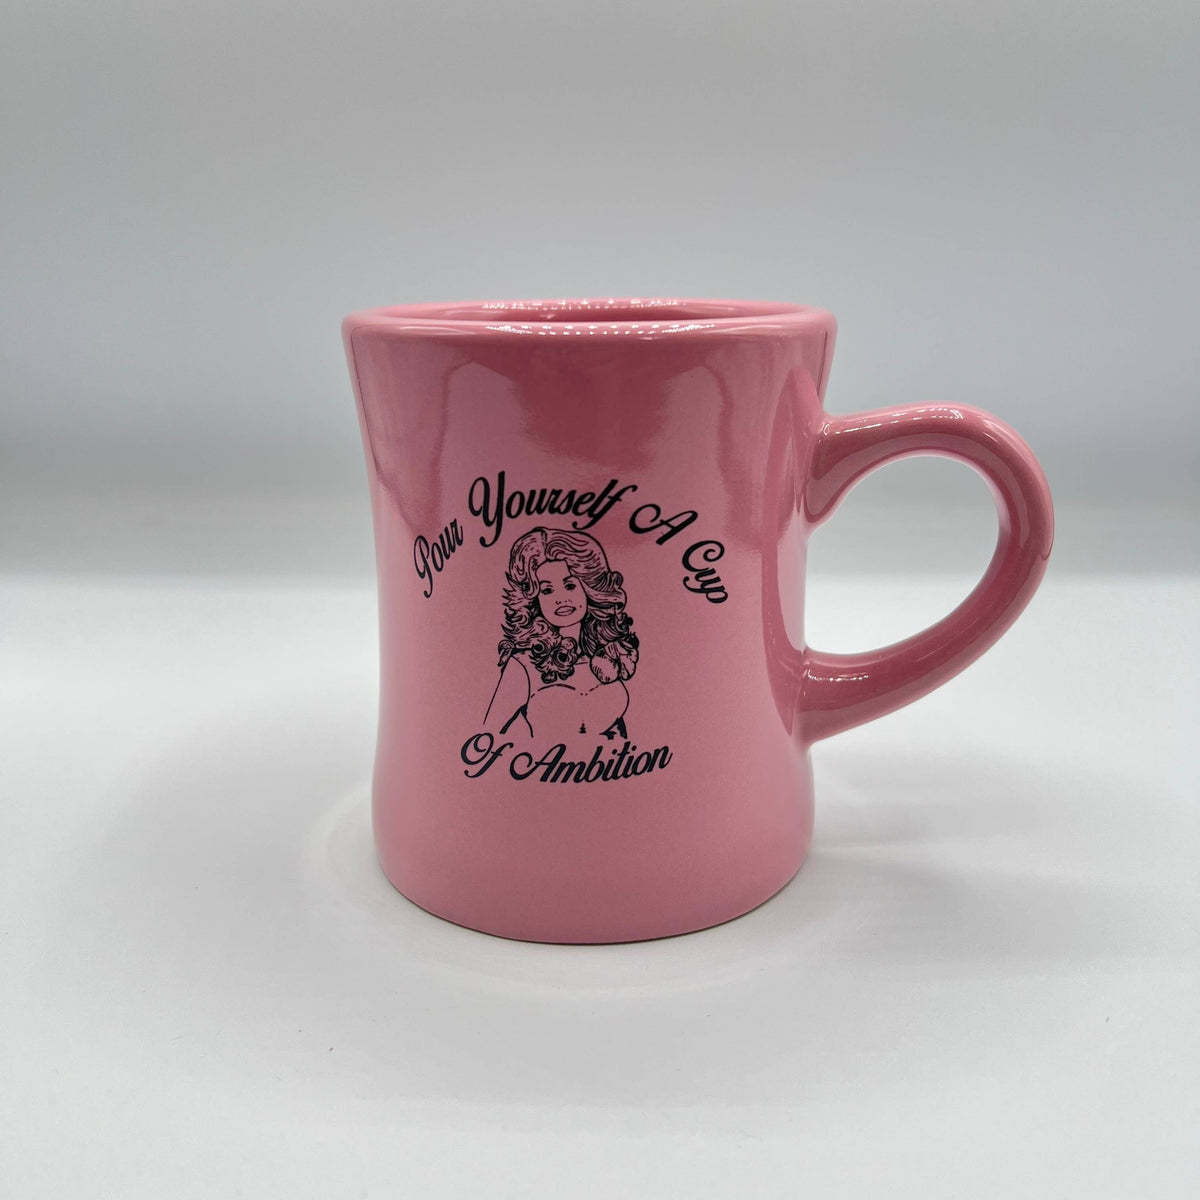 Pour Yourself A Cup Of Ambition - Dolly Parton Diner Mug